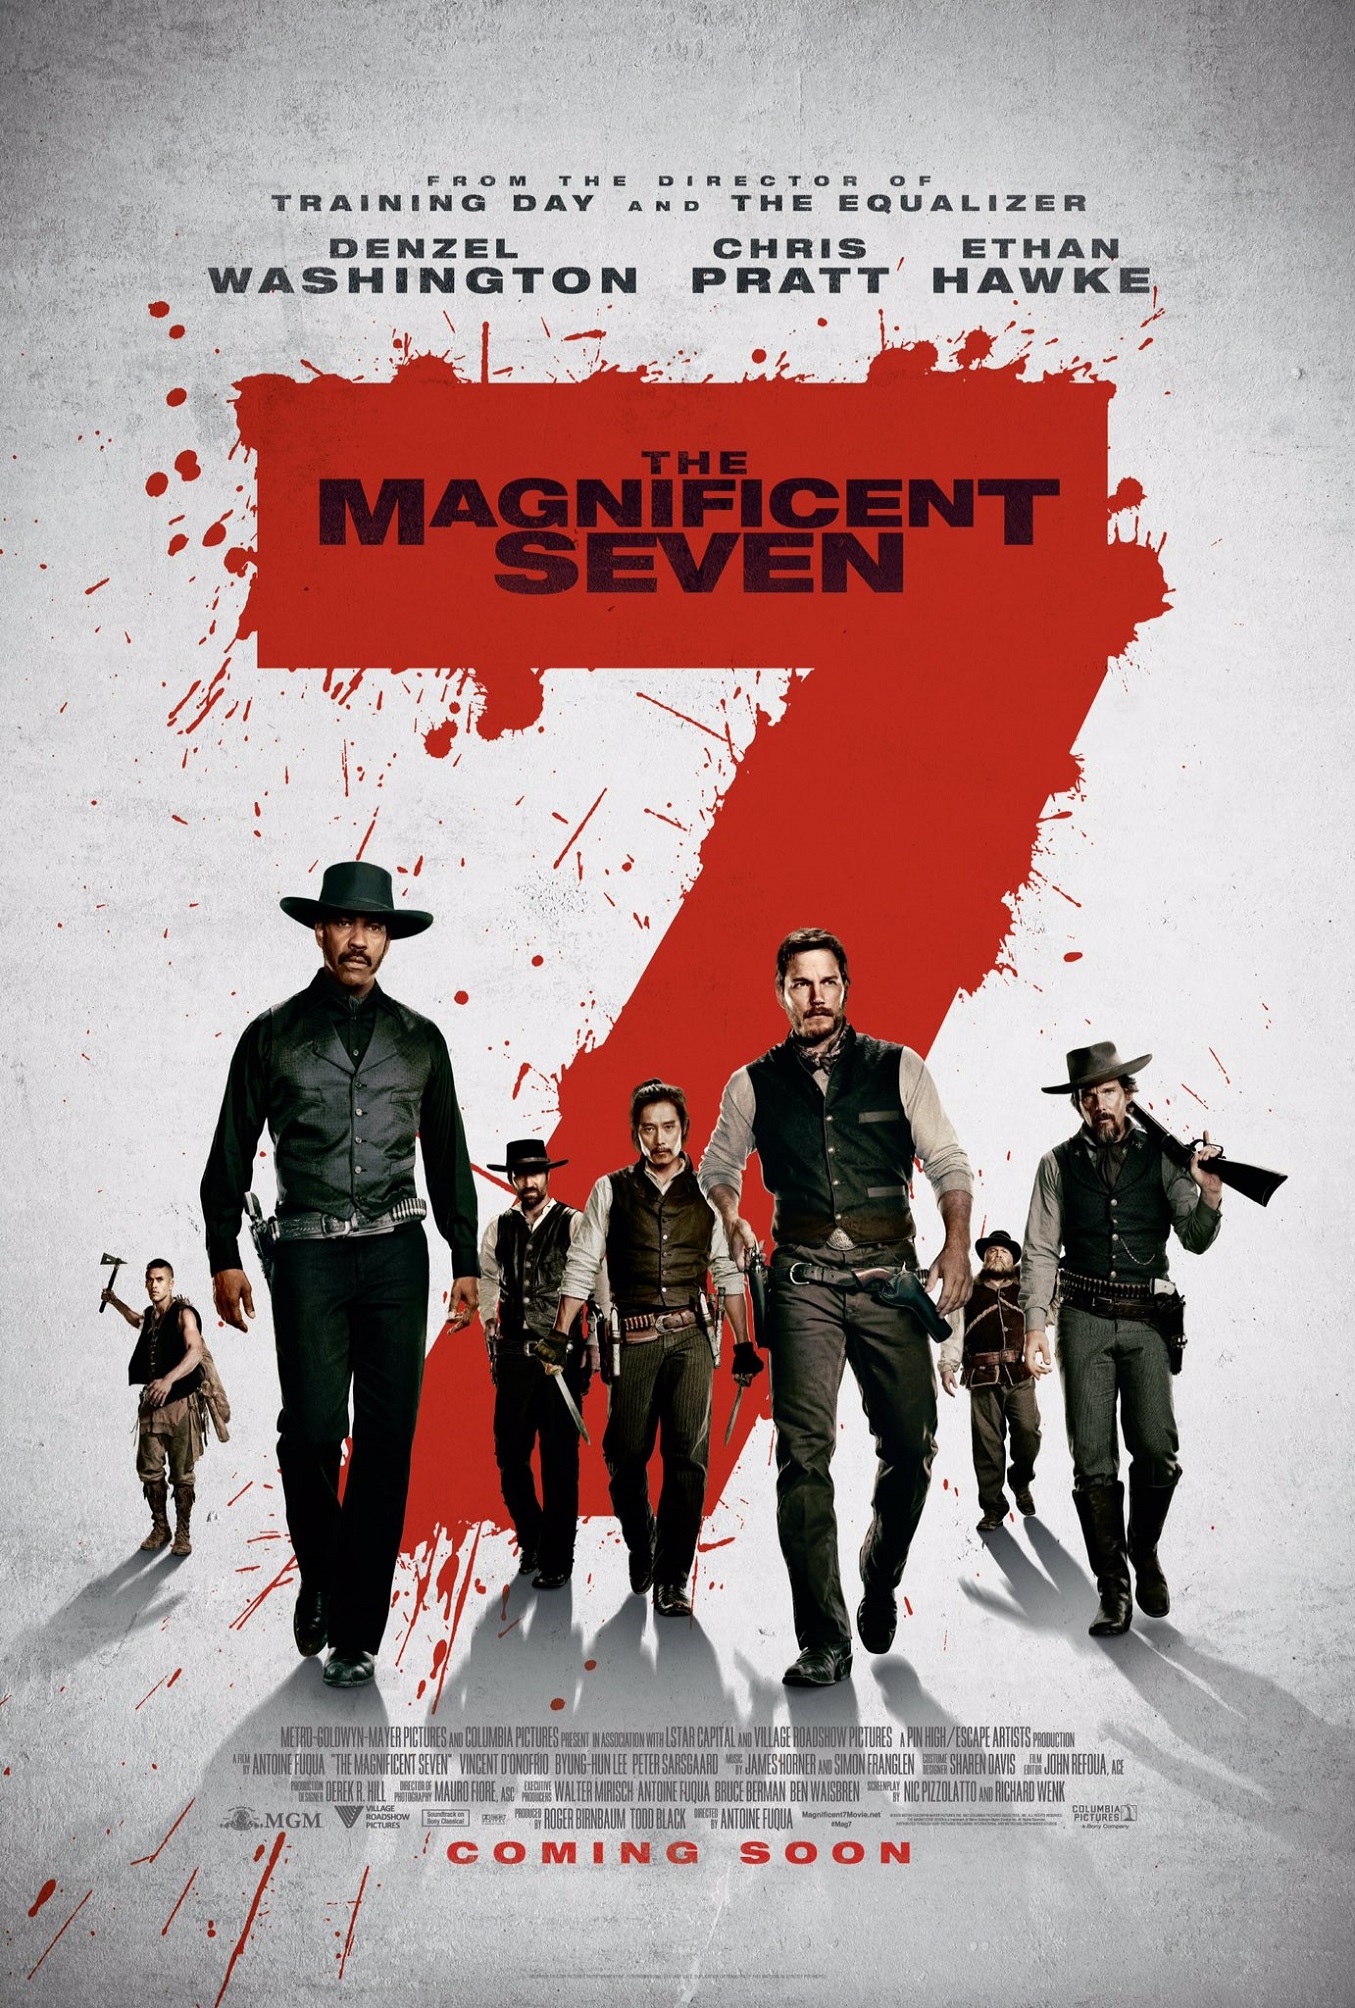 “The Magnificent Seven” Remake Sparks the Original